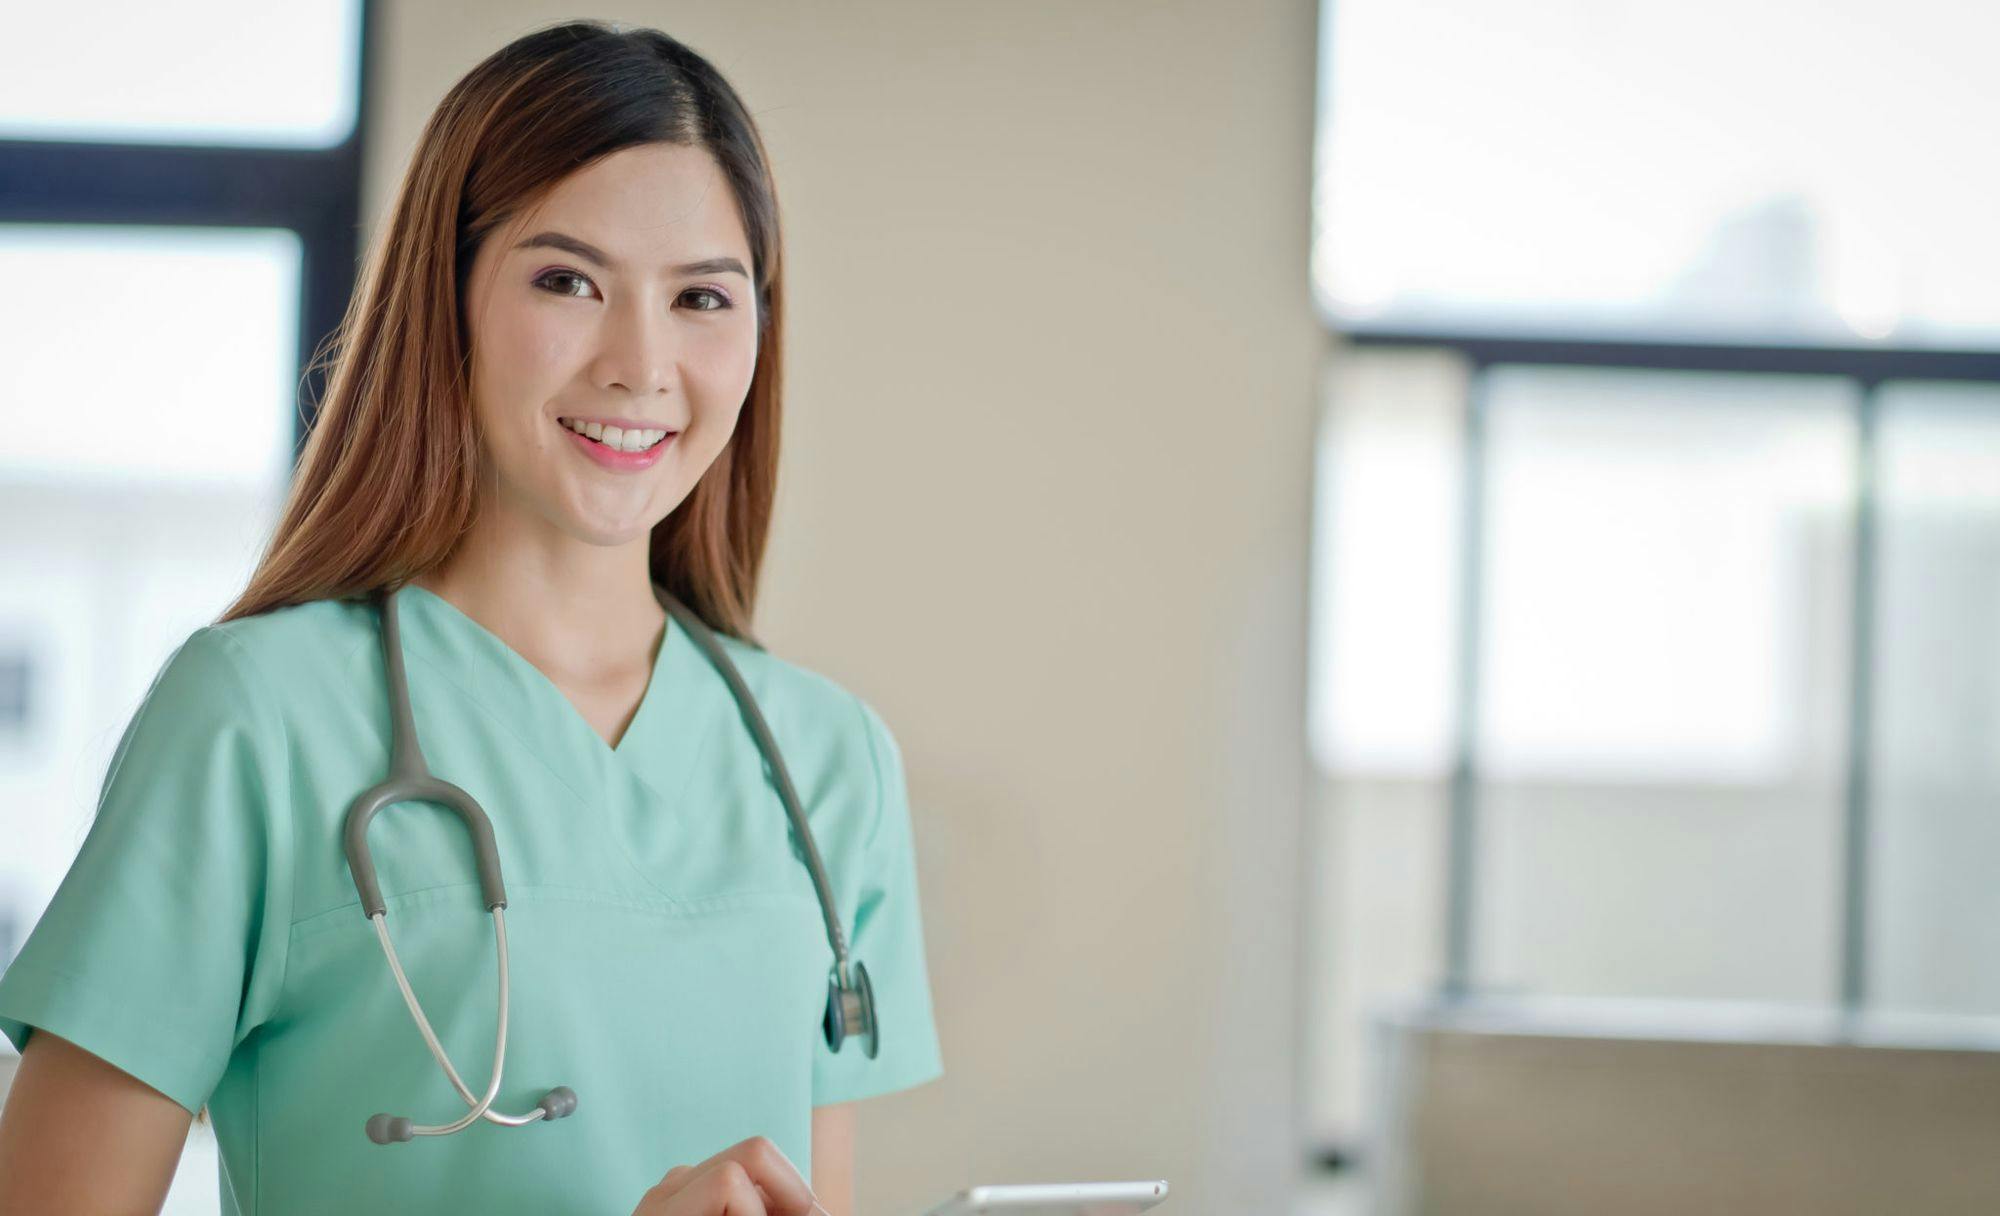 How Long Does It Take To Become a Medical Assistant?